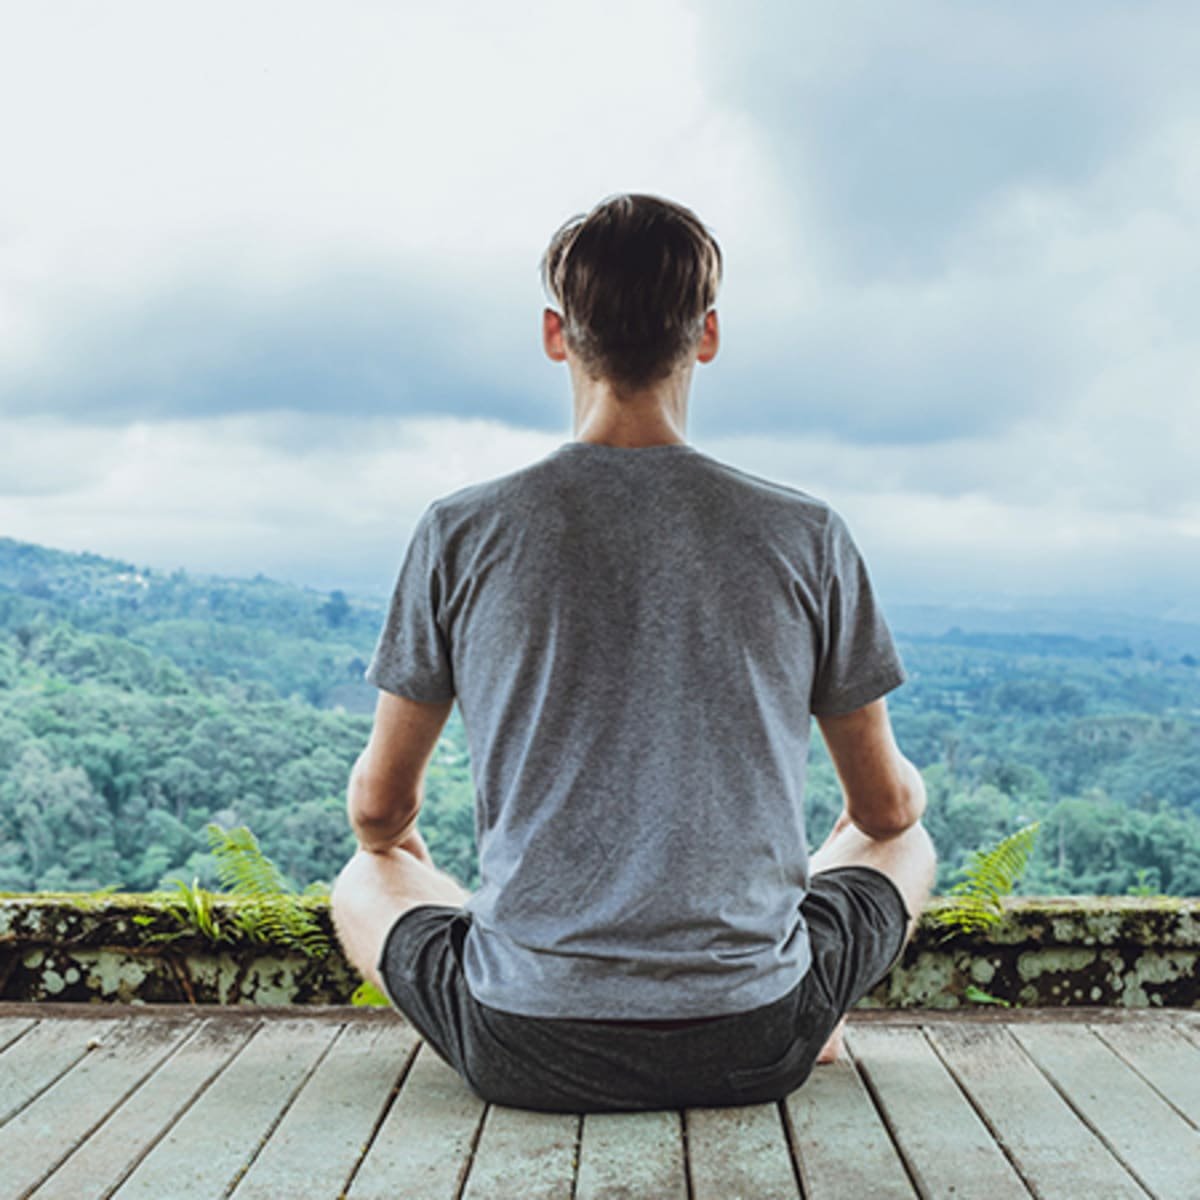 Study Suggests Women Benefit More from Mindfulness Meditation Than ...